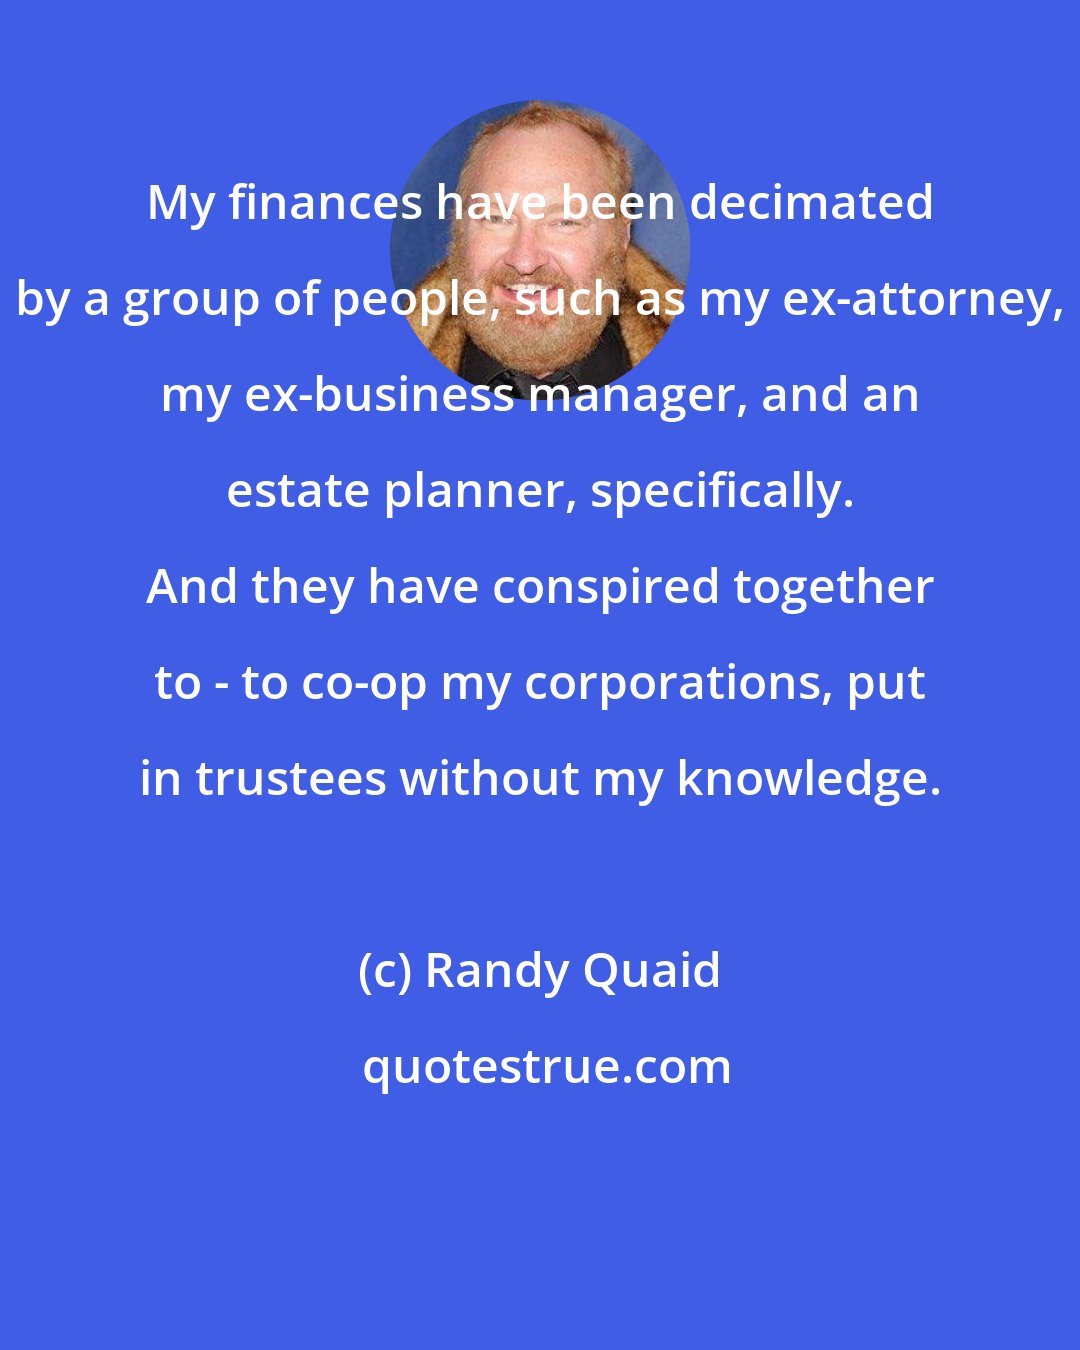 Randy Quaid: My finances have been decimated by a group of people, such as my ex-attorney, my ex-business manager, and an estate planner, specifically. And they have conspired together to - to co-op my corporations, put in trustees without my knowledge.